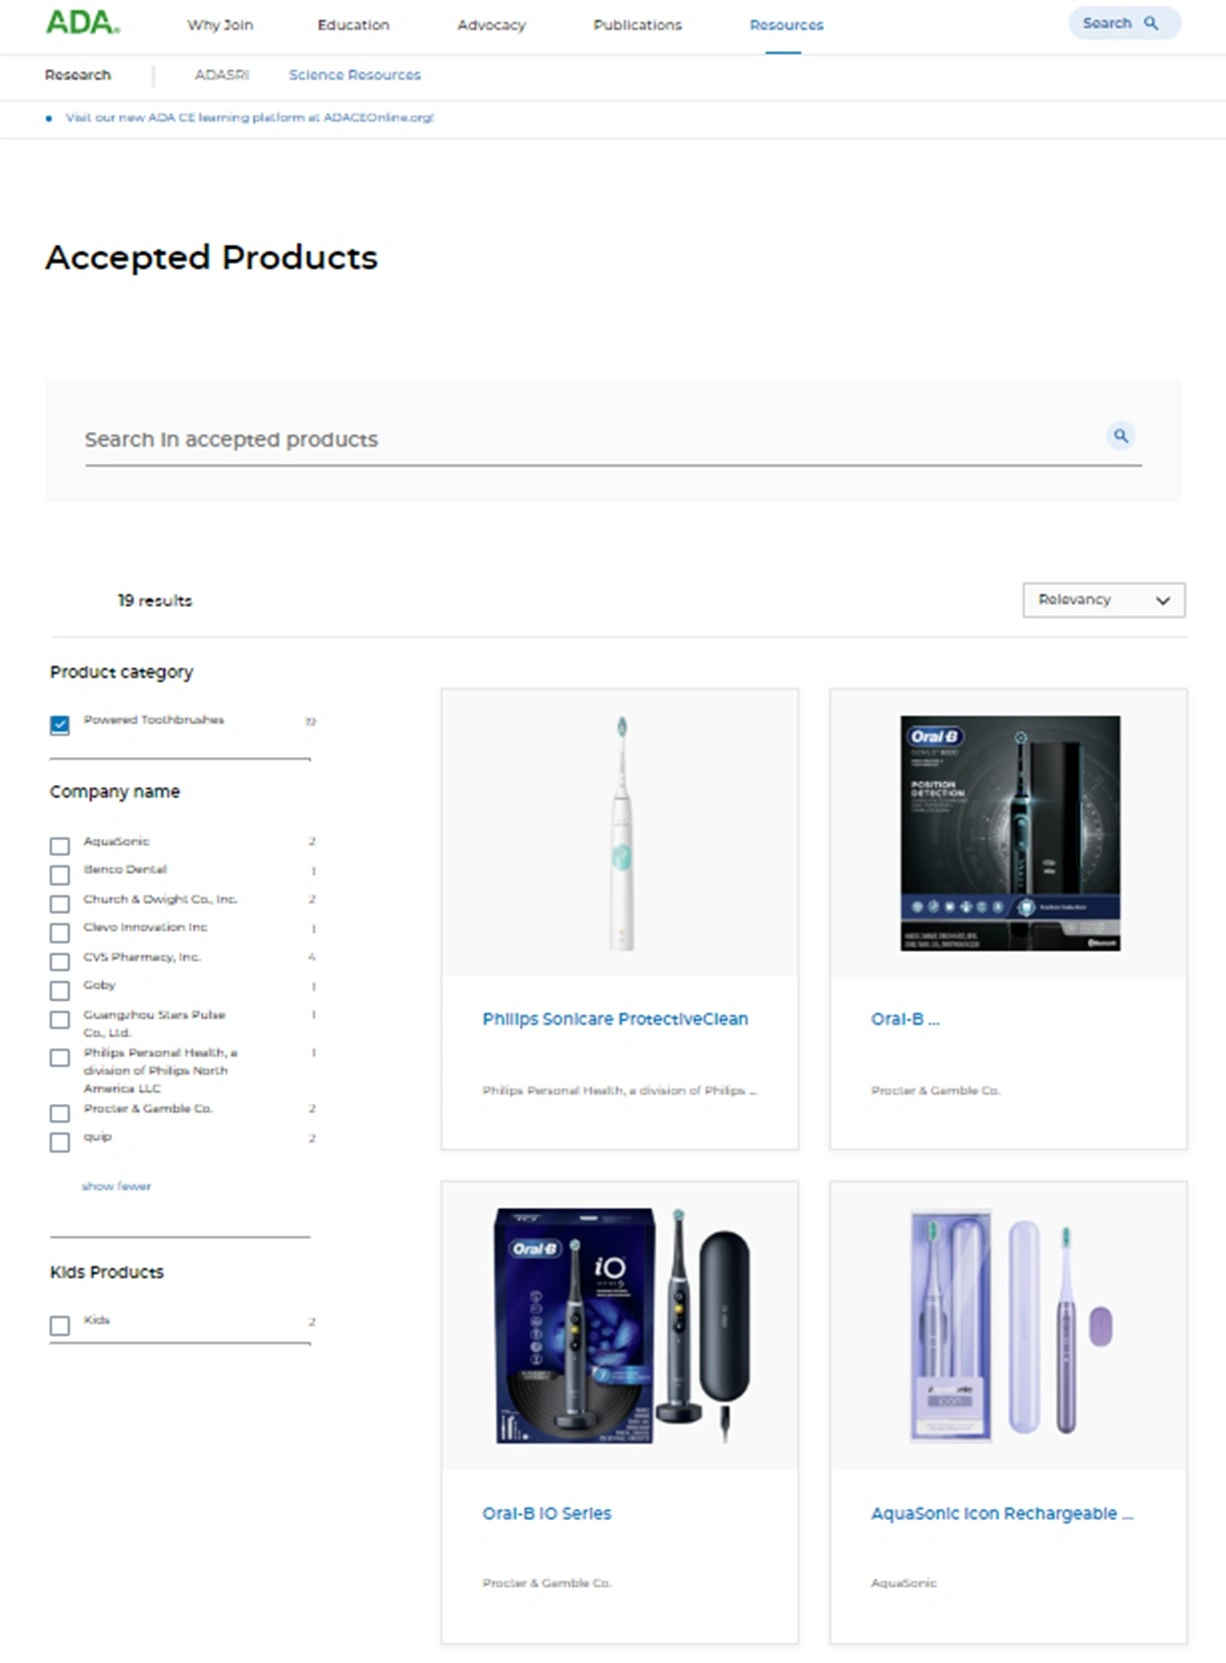 Image showing the power toothbrushes listed on theADA product search website